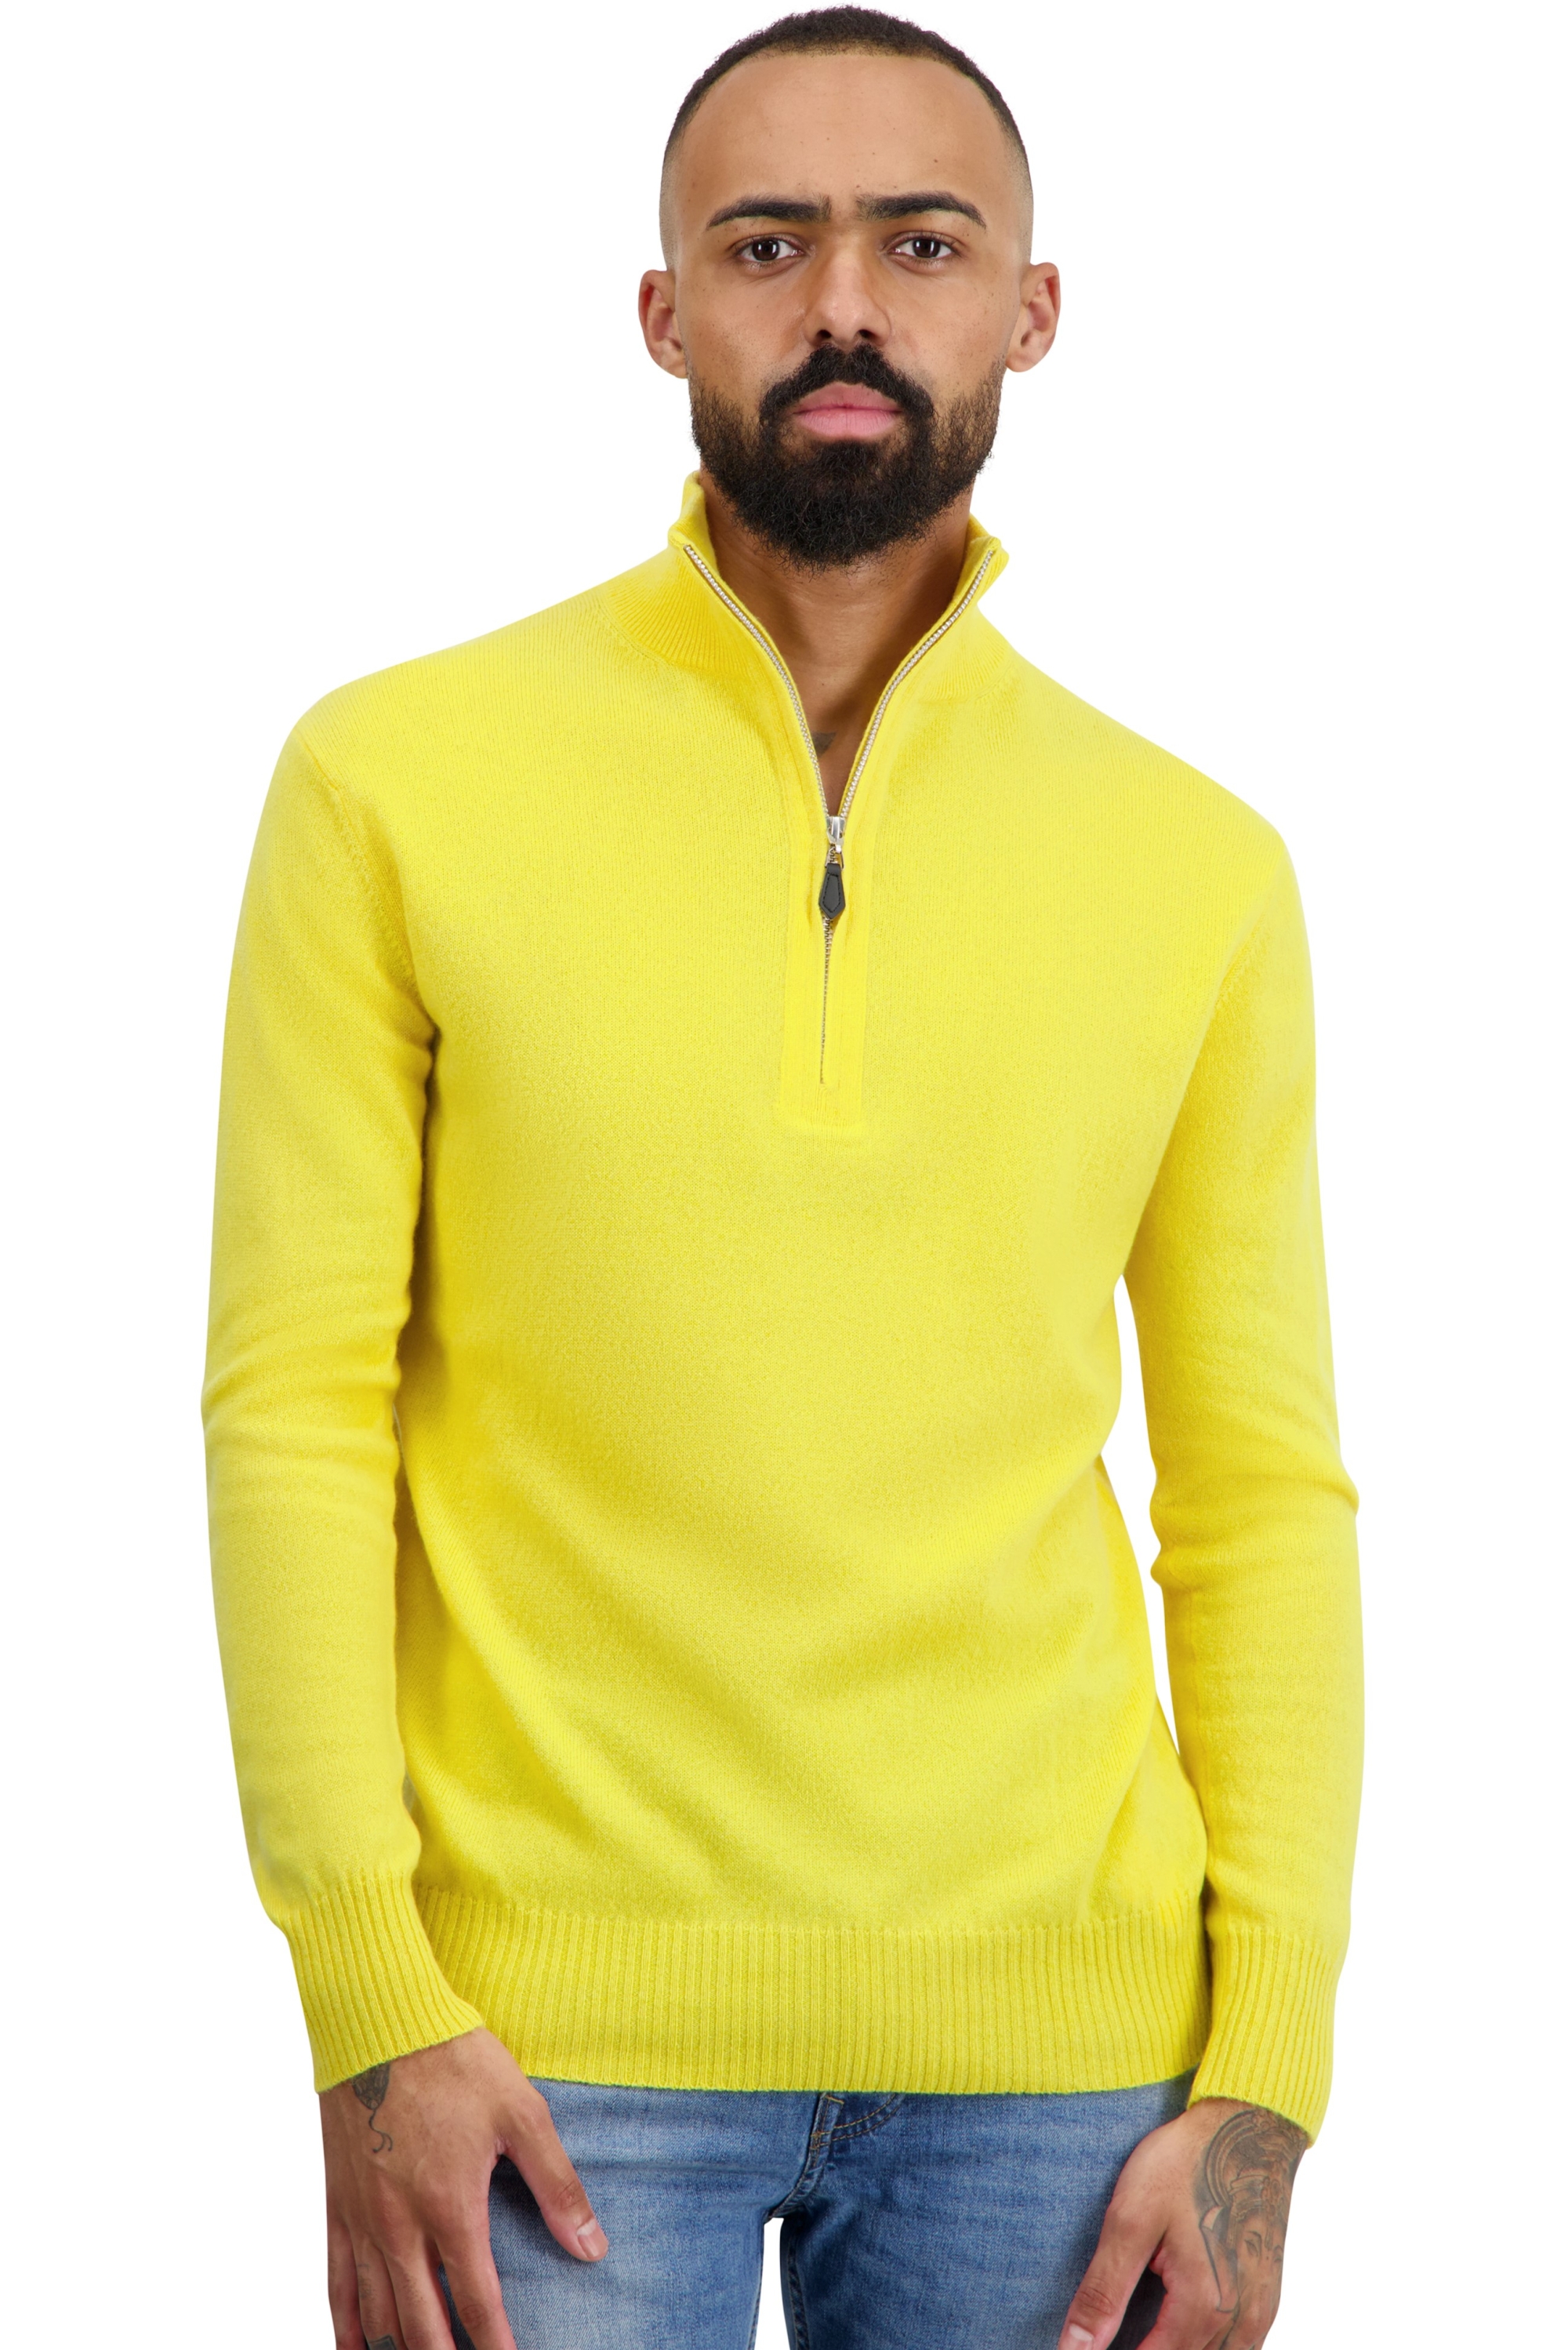 Cachemire petits prix homme toulon first daffodil 2xl